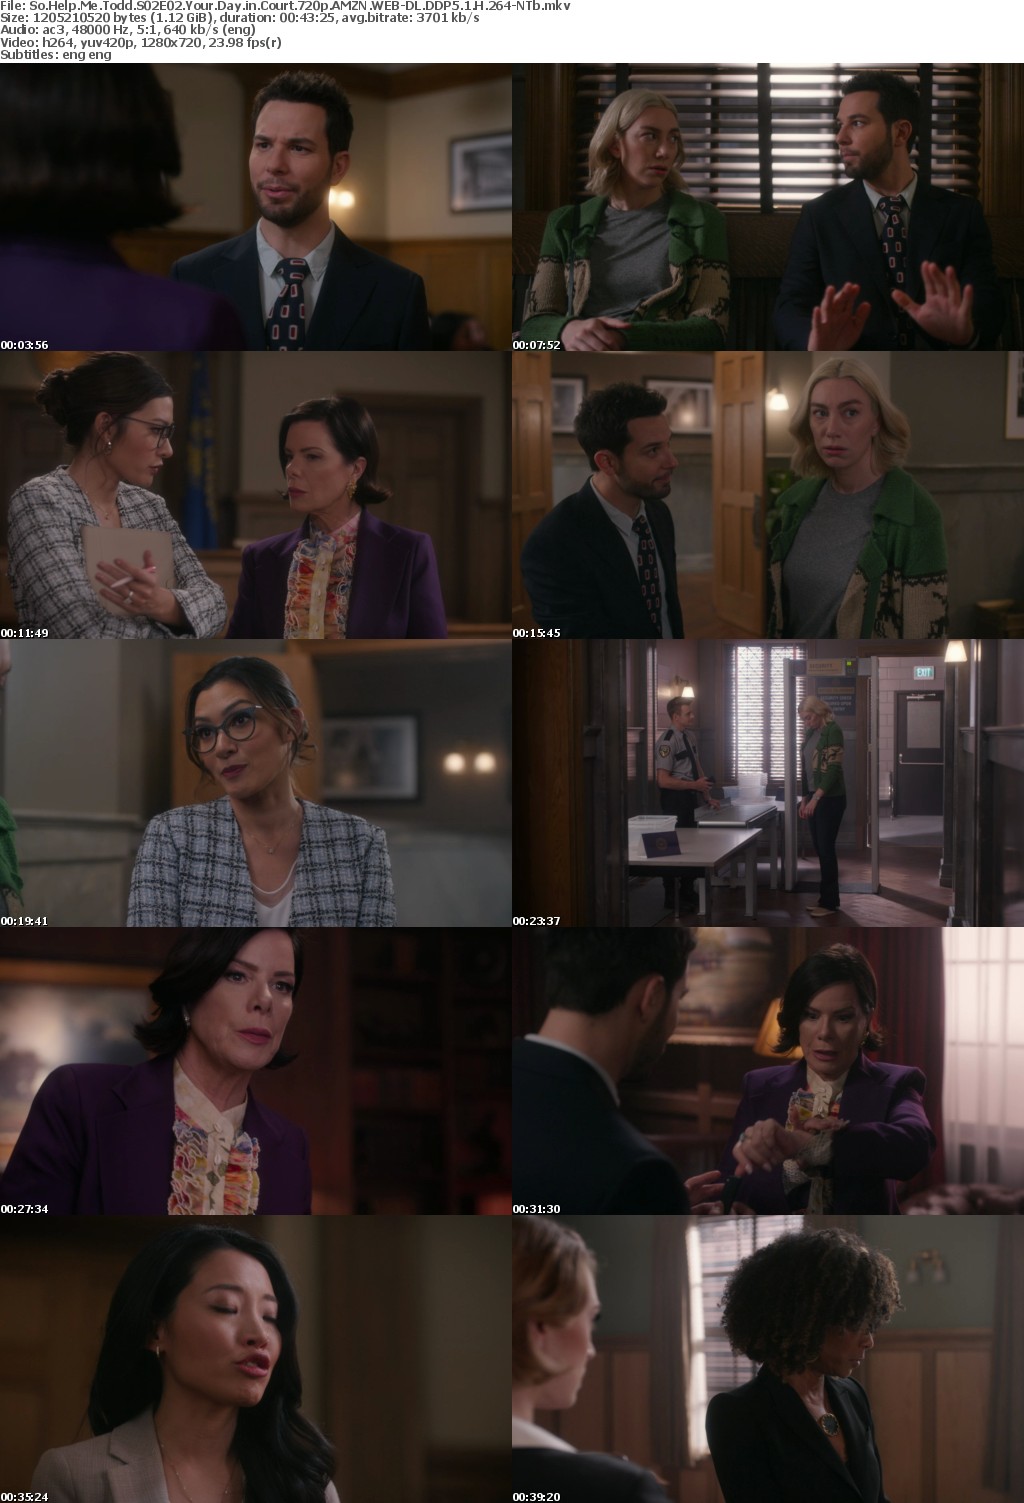 So Help Me Todd S02E02 Your Day in Court 720p AMZN WEB-DL DDP5 1 H 264-NTb